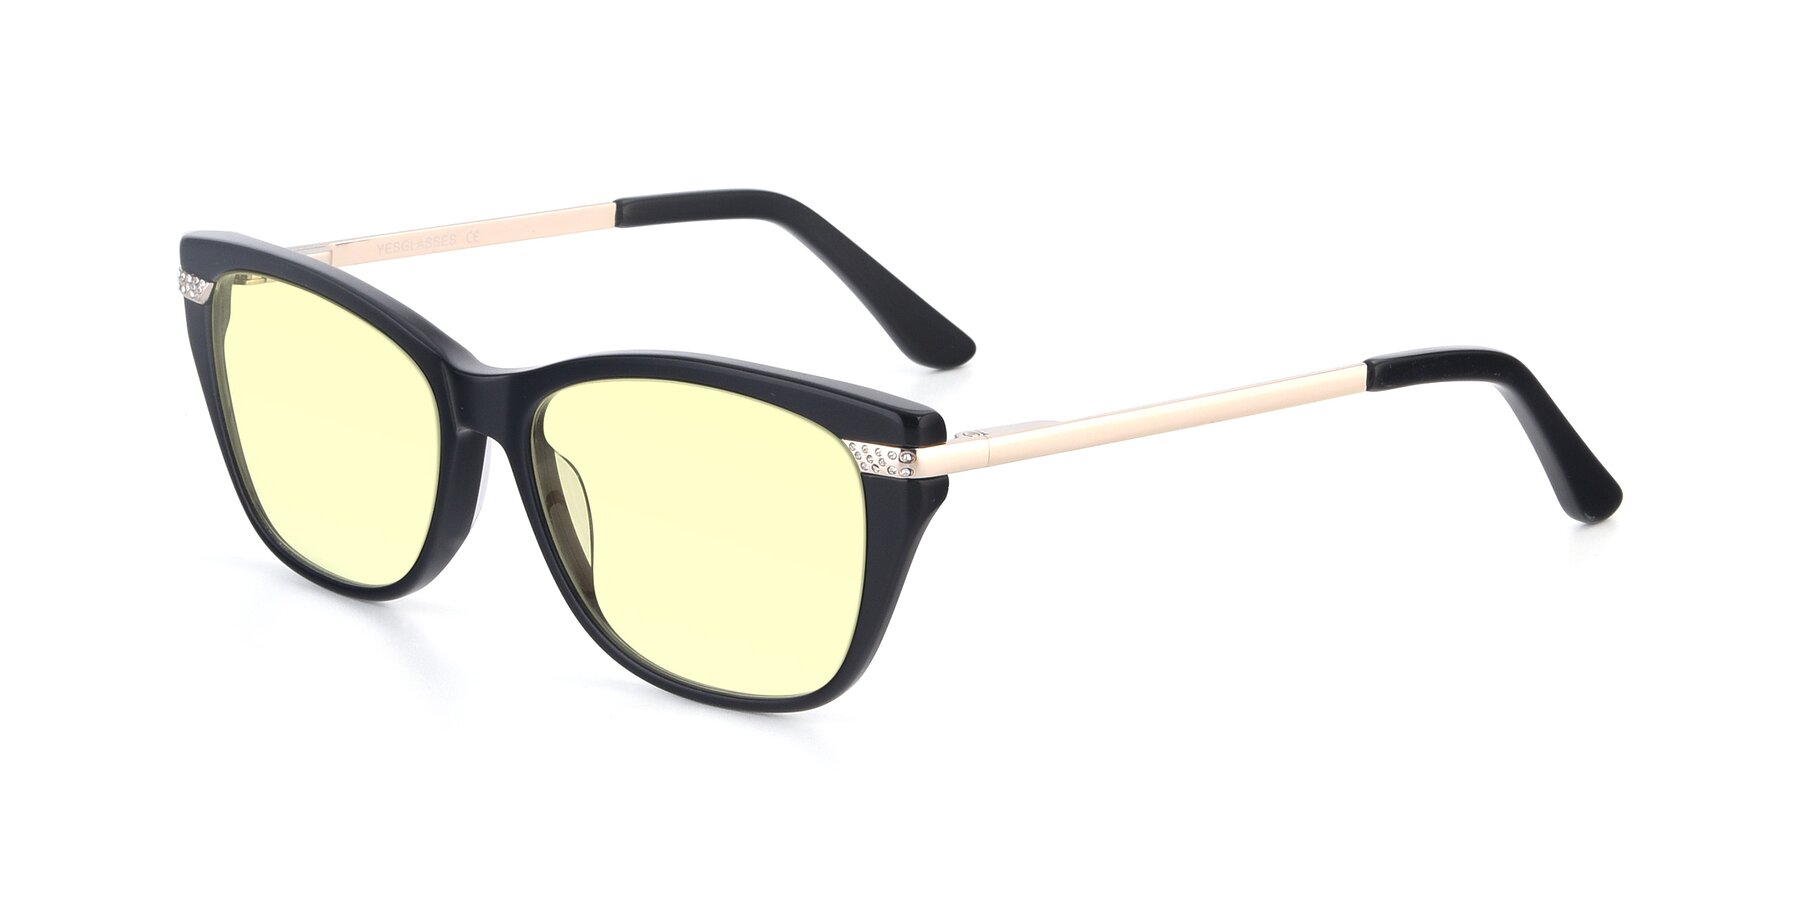 Angle of 17515 in Black with Light Yellow Tinted Lenses